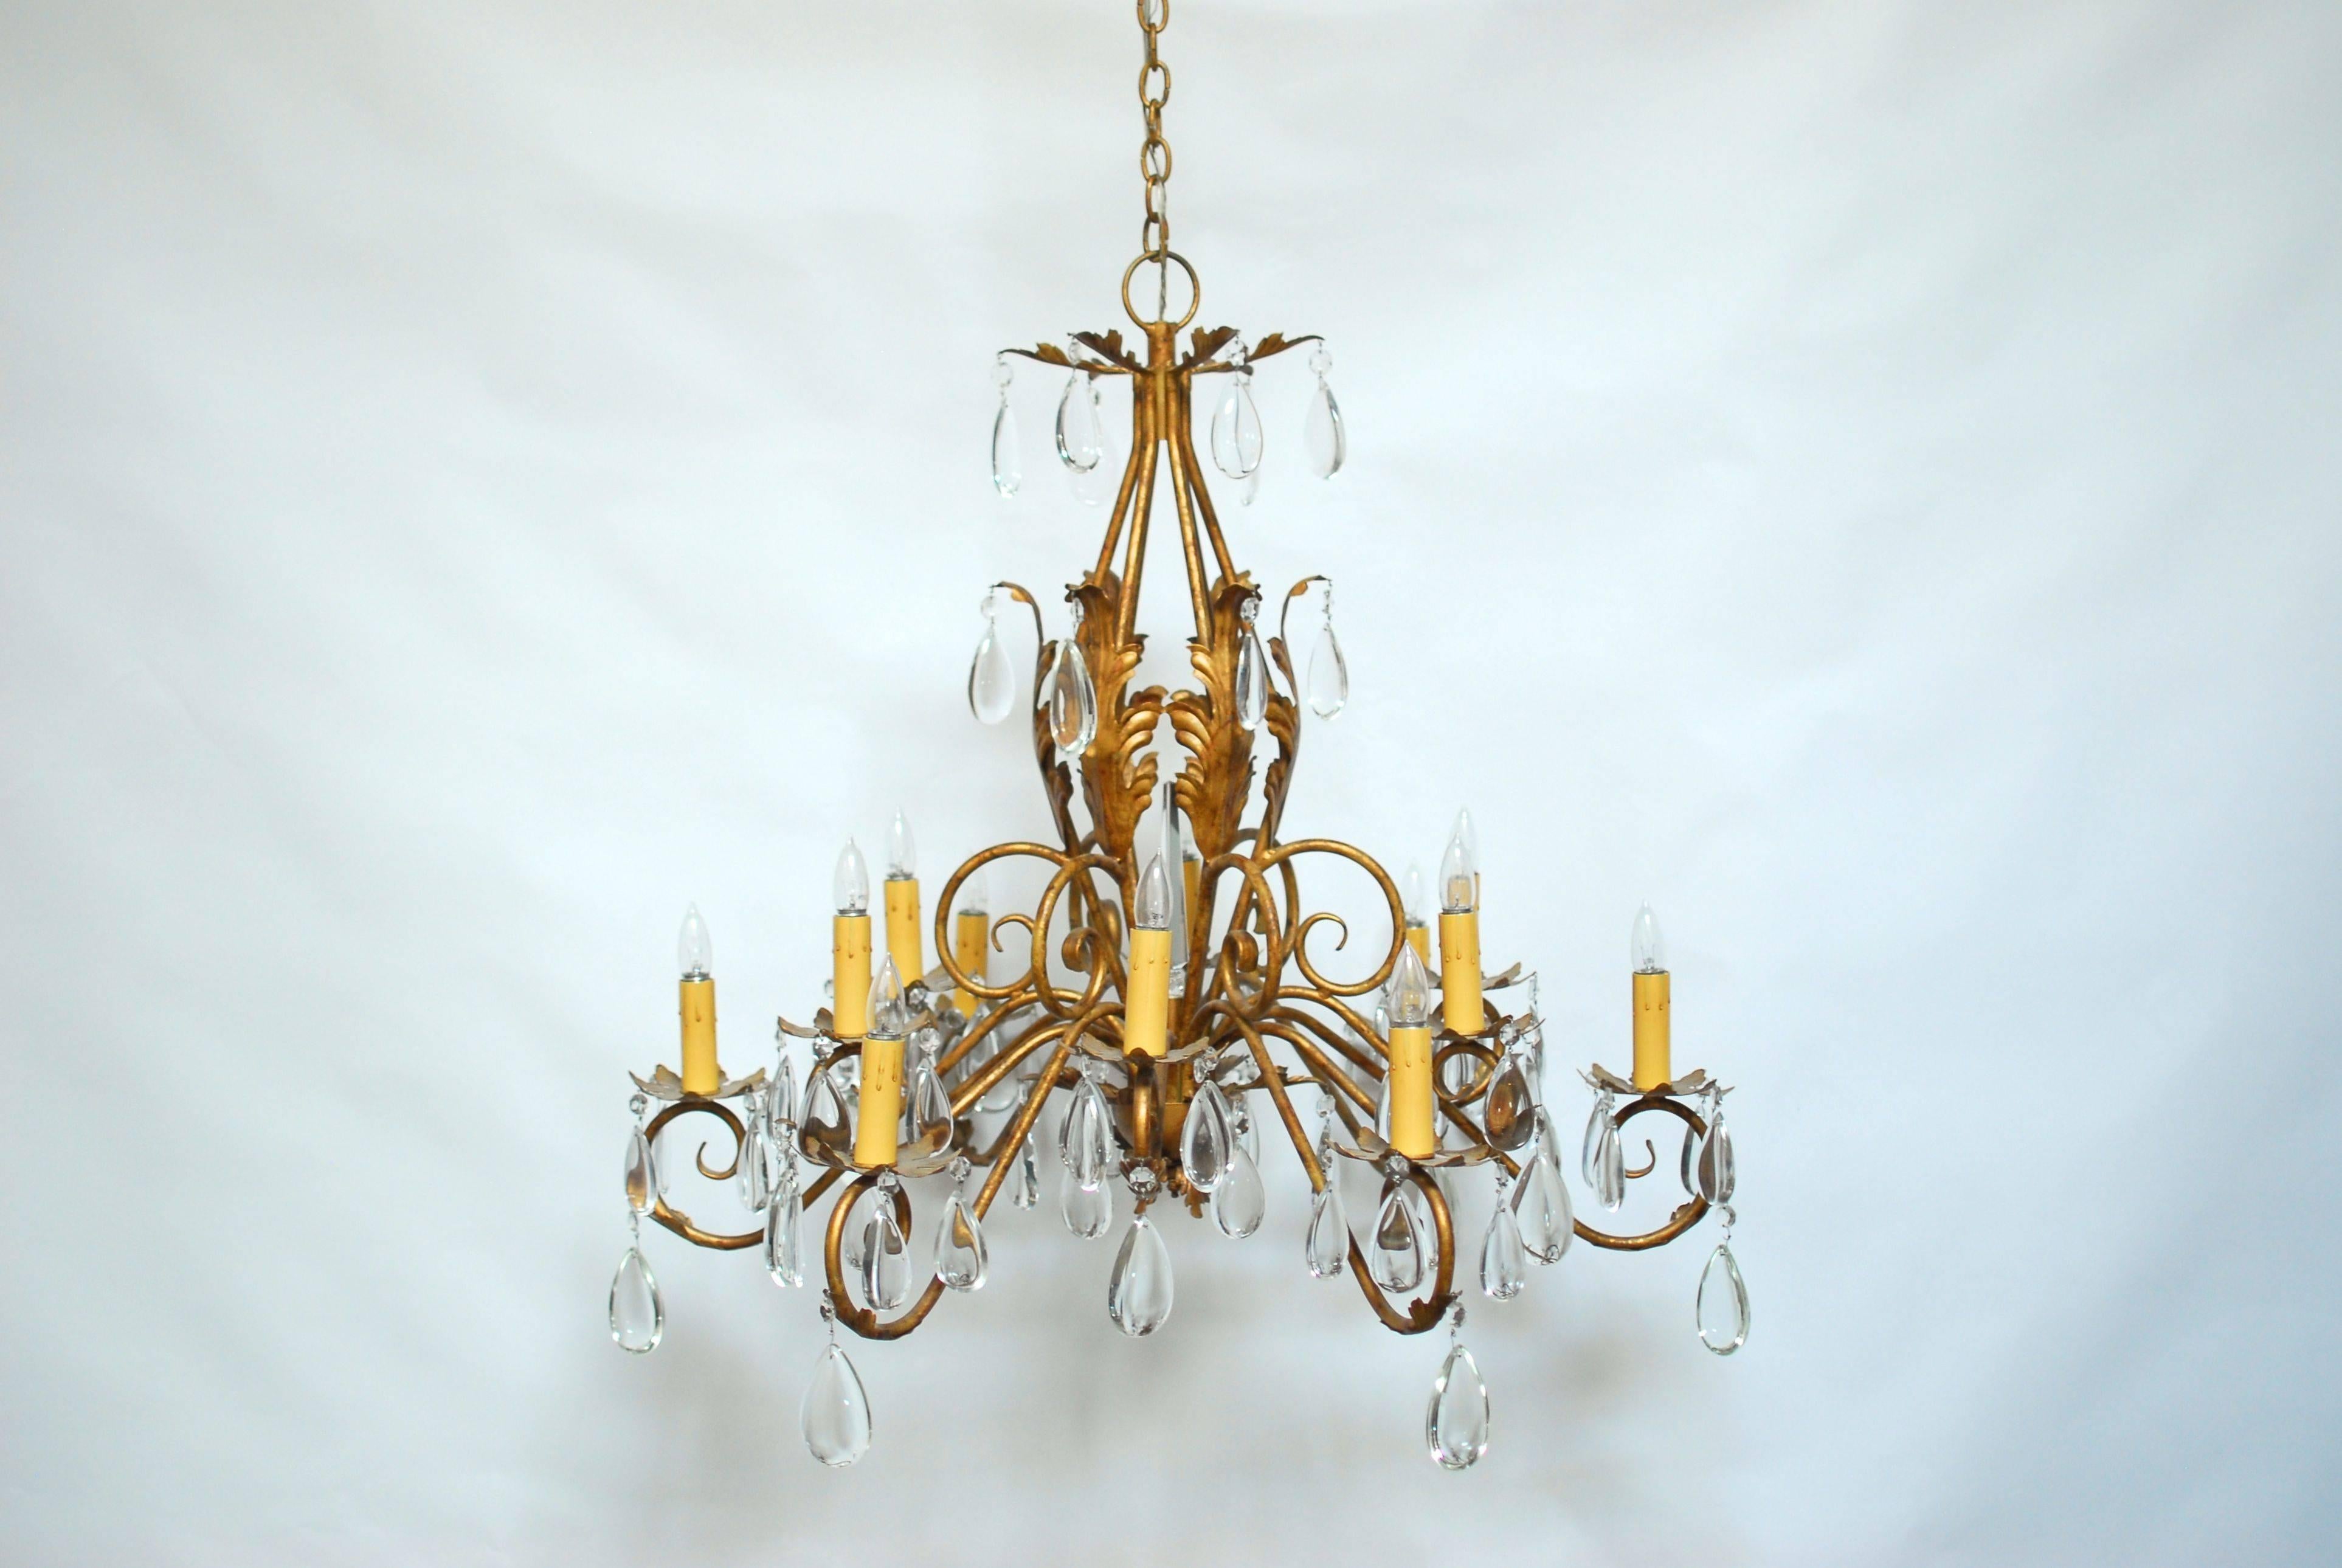 Elegant Louis XV style twelve-light gilt metal chandelier with scrolled arms and foliate bobeches topped by wax candle lights. Decorated with 78 huge, cut crystal teardrops hanging from Acanthus leaves. Centered by a long, tapered cut crystal.
